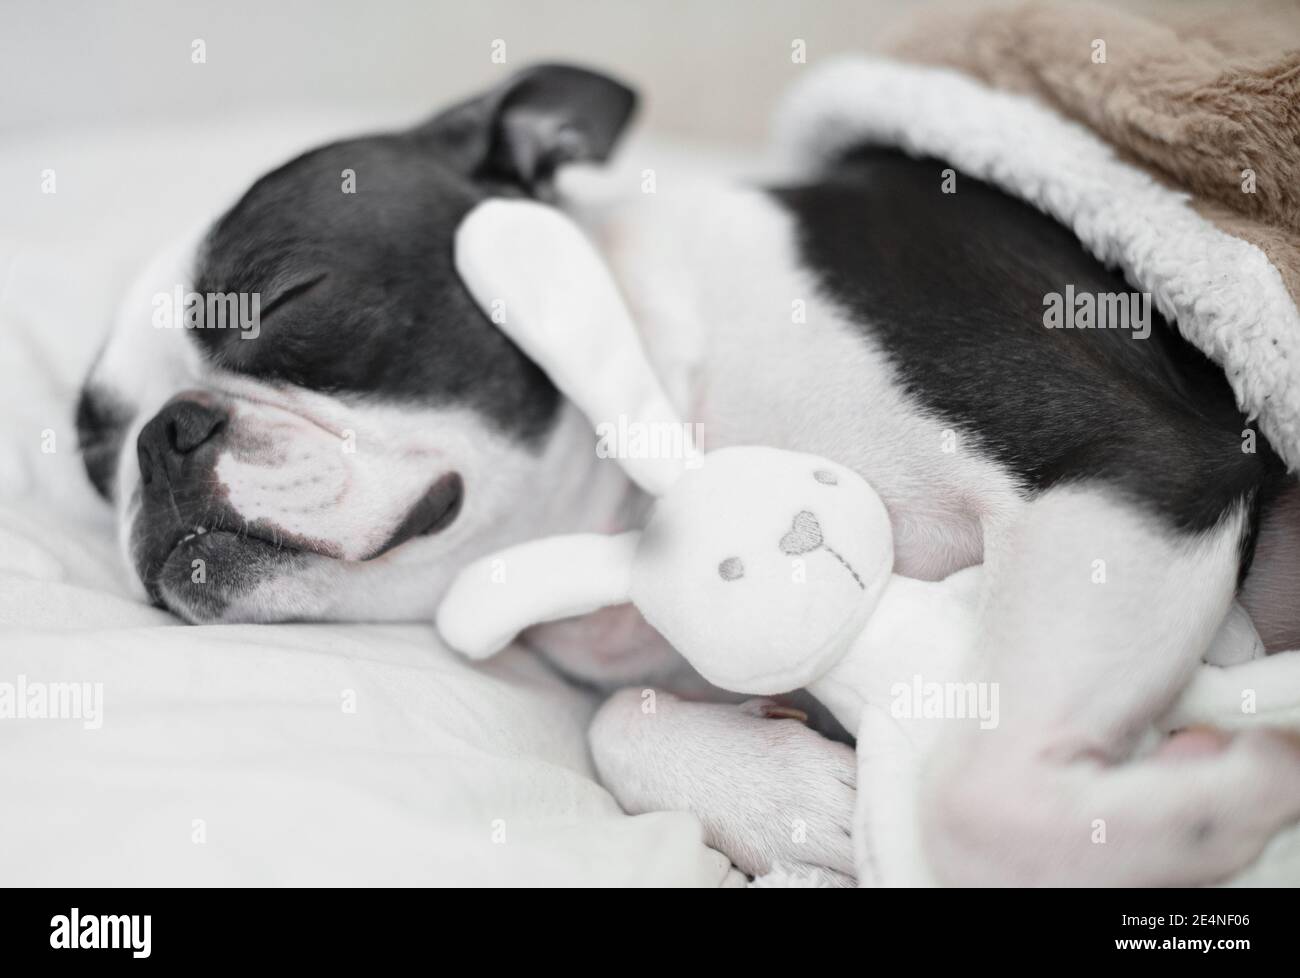 A young funny pet dog Boston Terrier with pleasure sleeps with his favorite toy - a white soft bunny in the bed under the blanket. Stock Photo